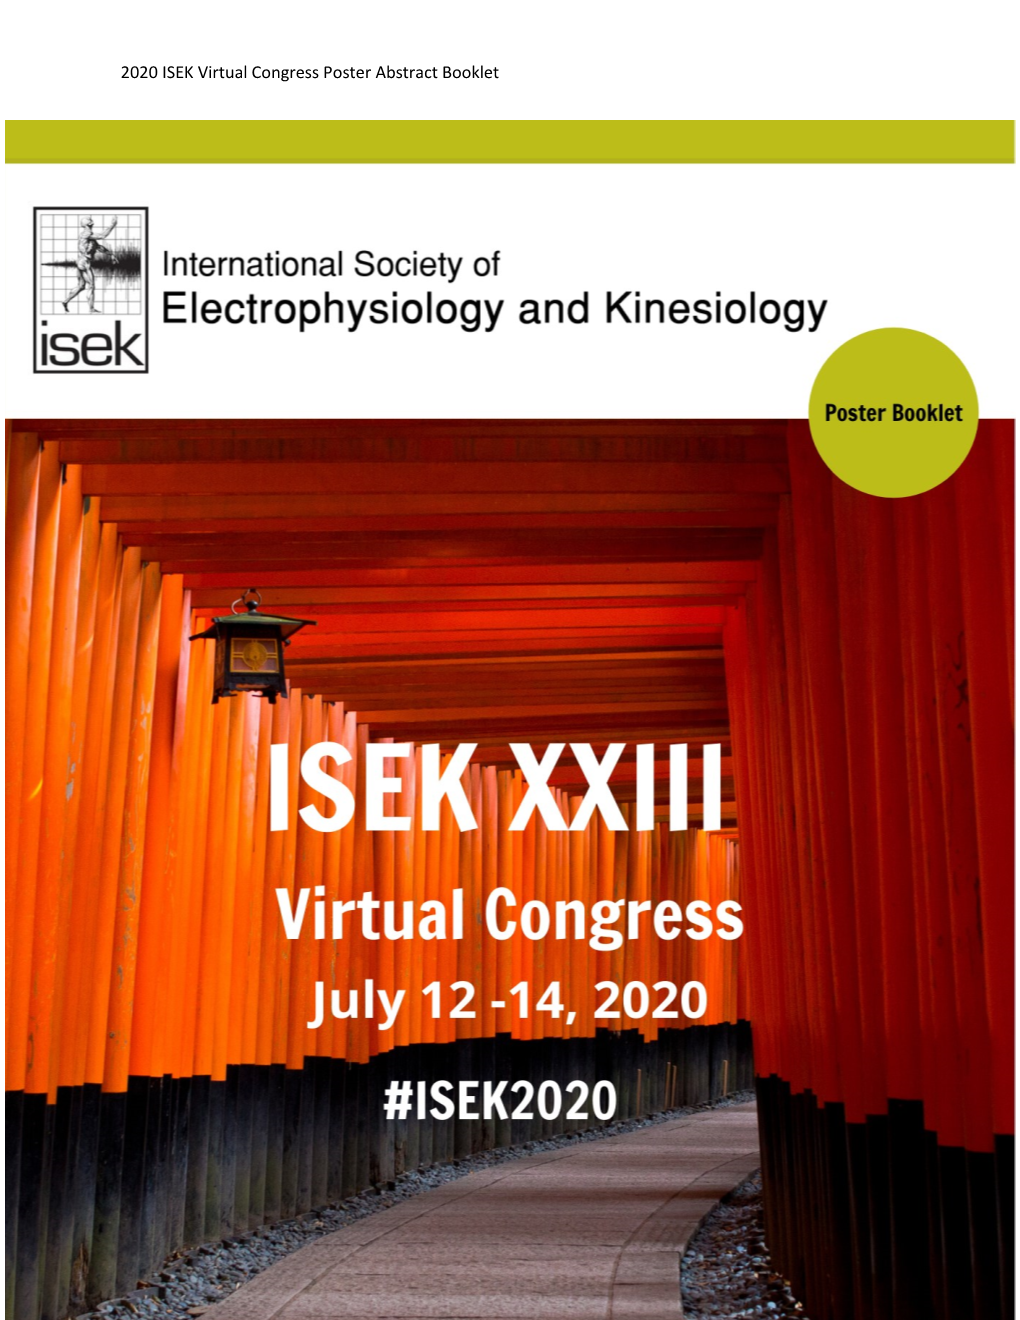 2020 ISEK Virtual Congress Poster Abstract Booklet 1